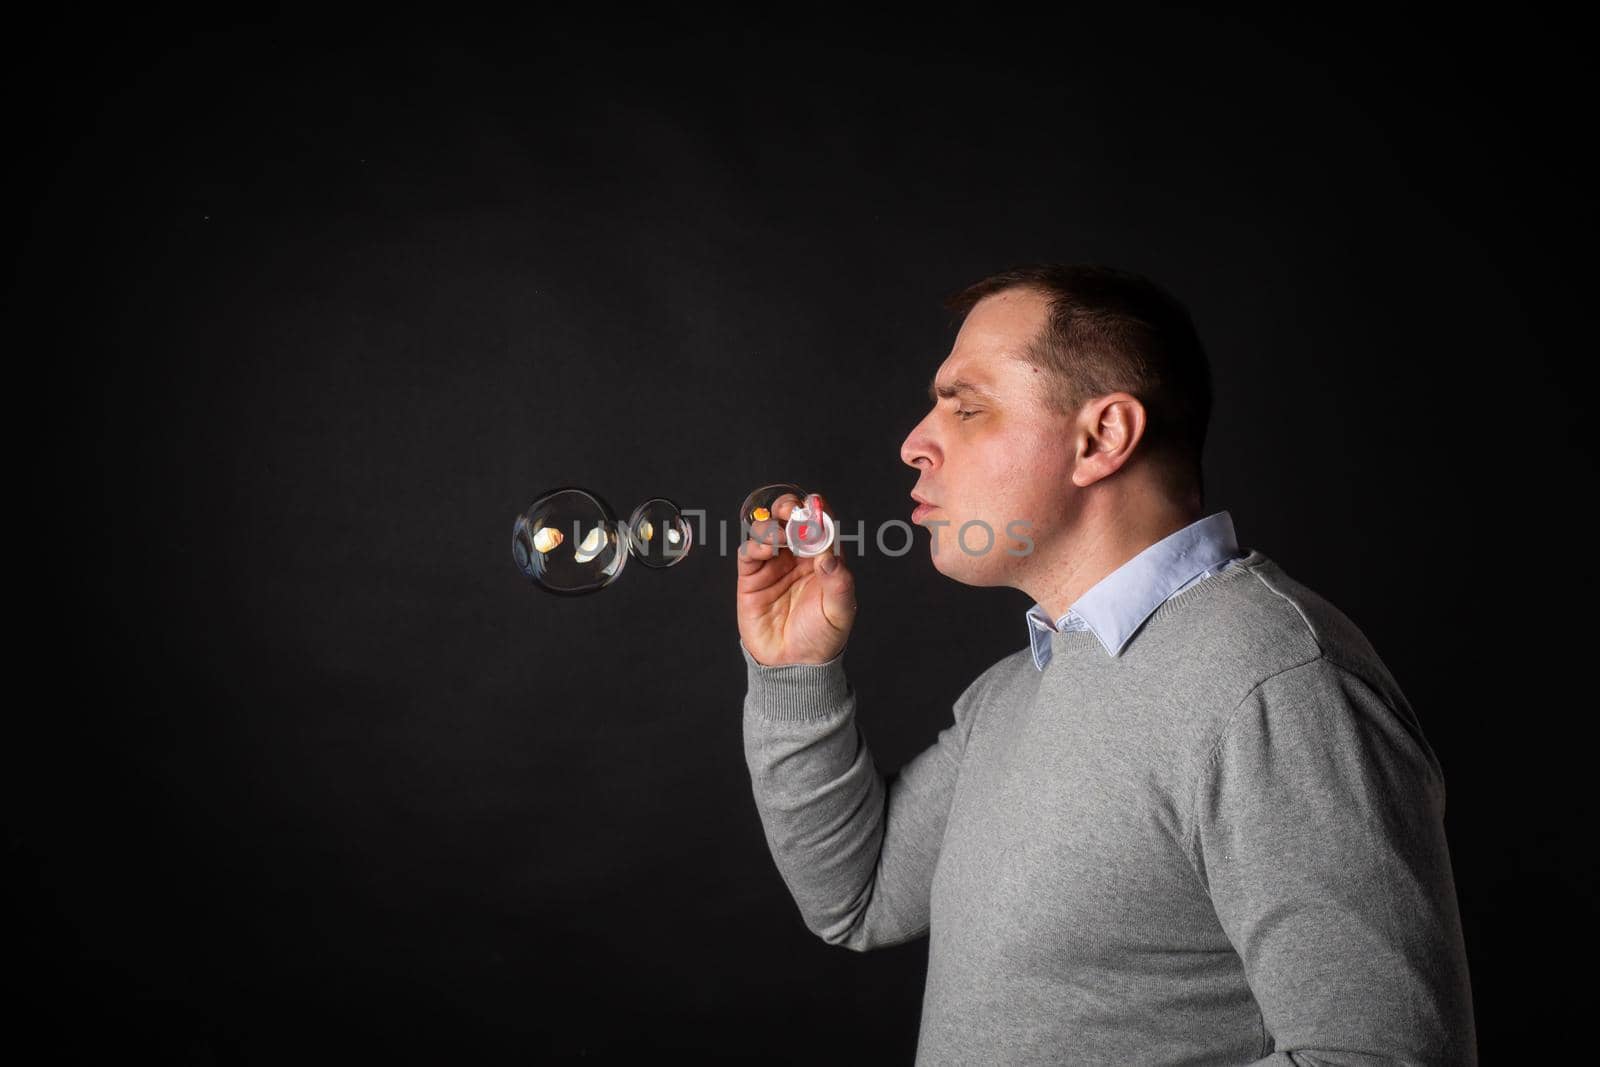 handsome man in a suit is blowing soap bubbles. isolated on a black background